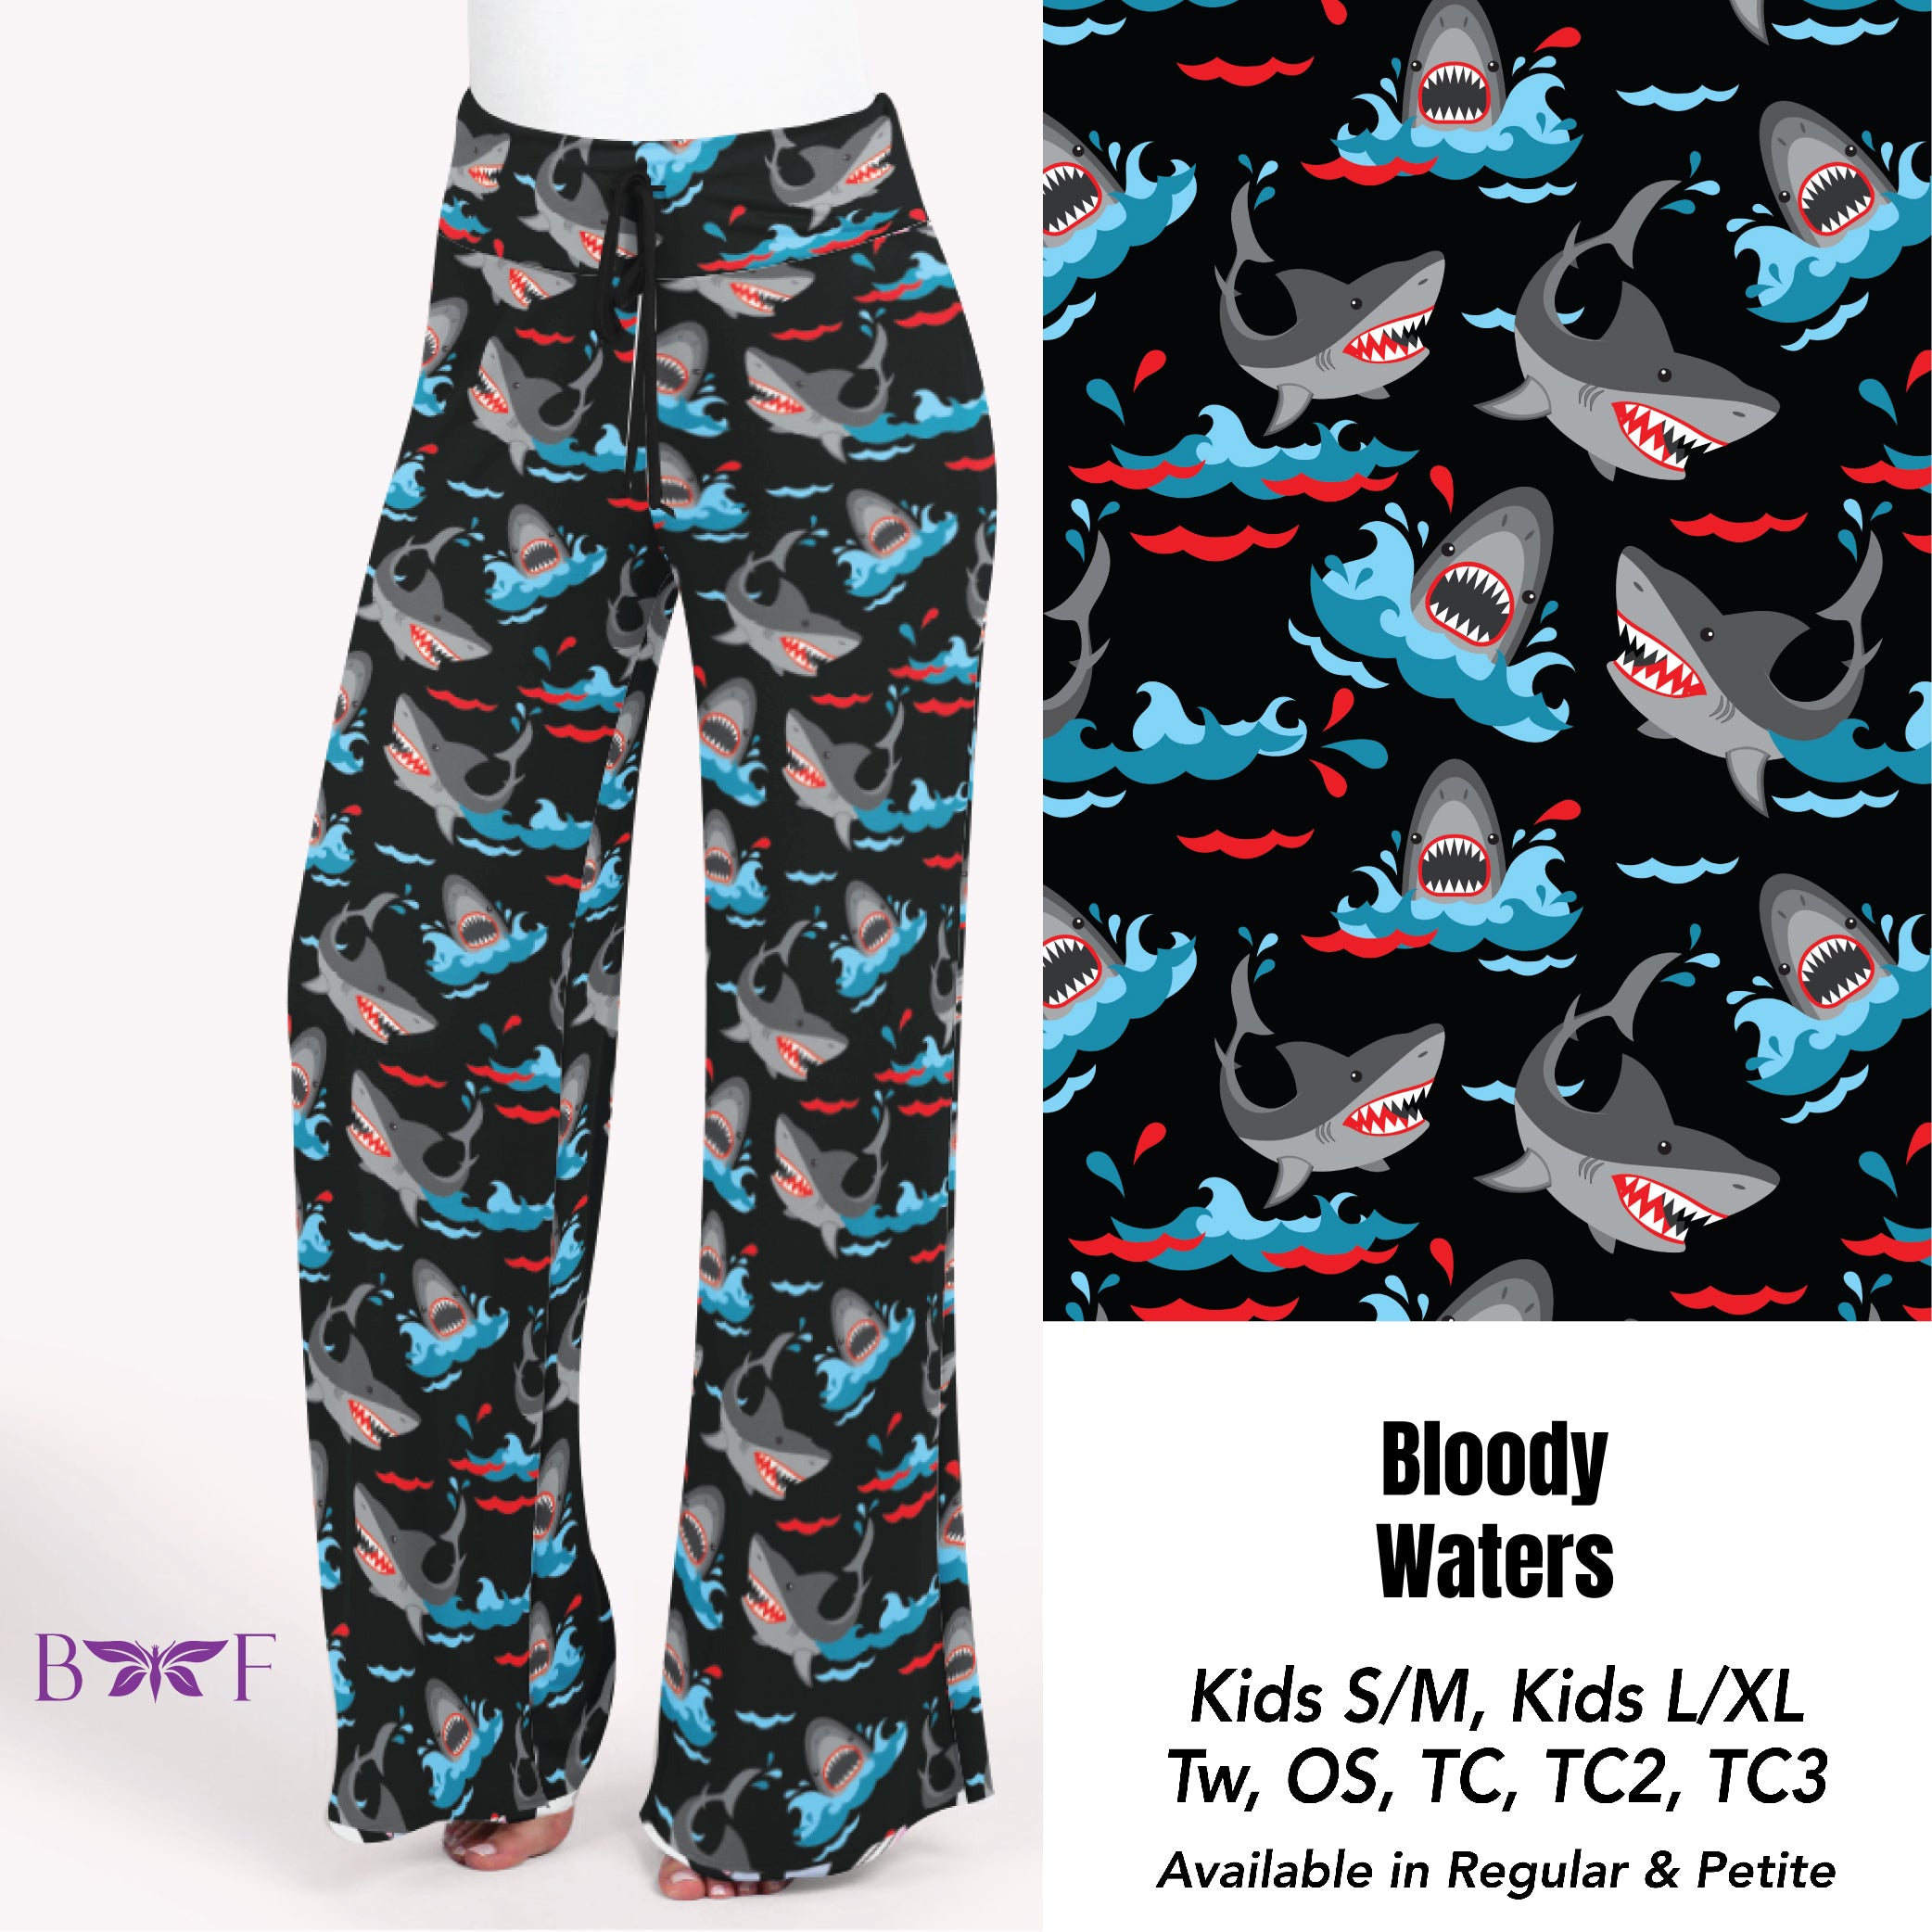 Bloody Waters Leggings and Joggers